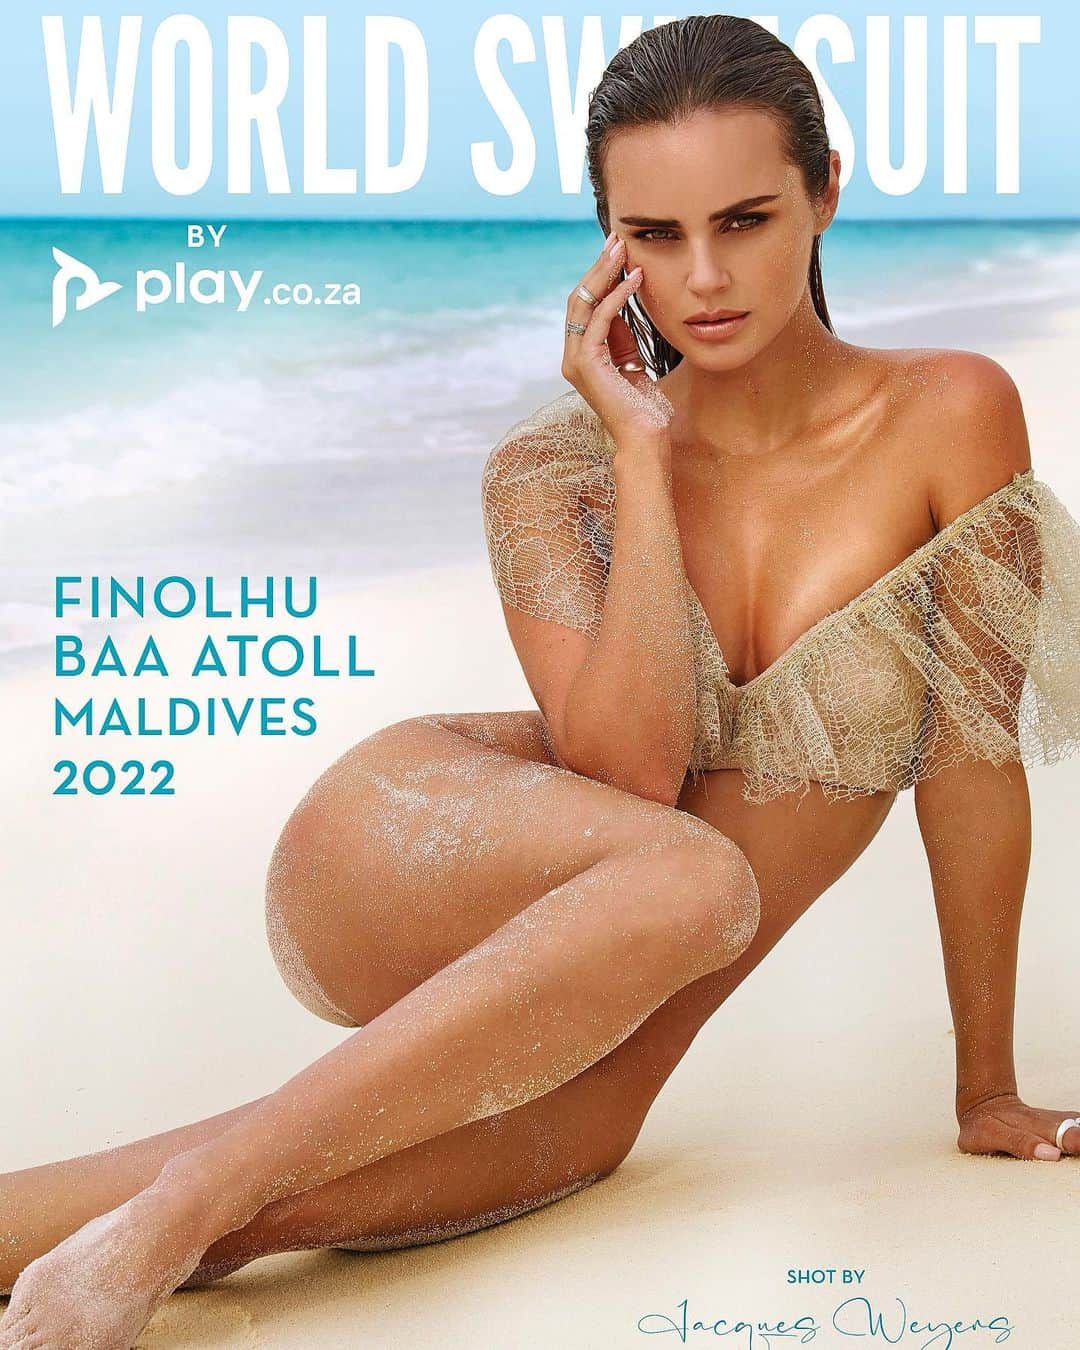 ゼニア・デリさんのインスタグラム写真 - (ゼニア・デリInstagram)「English/Russian  I'm so proud of you Xenia. This year 2022 the cover of @worldswimsuit_com is yours. Probably one of the best covers you've ever done. So stately, so sensual, mature and of course beautiful. I will never stop admiring you. You are now 33, you have everything you dreamed of. You have a family, you have your small circle of constant friends, you have opportunities, and most importantly, you have yourself. I know, you work hard  on yourself, both mentally and physically. You are turning into an amazing person,that I never knew before. Keep going and don't stop. After all, there are so many more interesting and exciting things waiting for you. @play.coza @jacquesweyers.studio @malakelezzawy @finolhu_maldives  Я так горжусь тобой,Ксения. Обложка 2022 году @worldswimsuit_com твоя. Наверное, одна из лучших обложек,которую ты делала.Такая статная,такая чувственная,взрослая ну и конечно красивая.Никогда не перестану восхищаться тобой.Тебе сейчас 33, у тебя есть все о чем ты мечтала.У тебя есть семья,у тебя есть твой маленький круг неизменных друзей, у тебя есть возможности,а самое главное у тебя есть ты сама.Я знаю,ты много трудишься  над собой как в ментальном, так и физическом плане.Ты превращаешься в удивительного человека, которого я раньше и не знала.Продолжай идти и не останавливайся. Ведь тебя ждёт еще столько всего интересного и увлекательного.」12月2日 17時59分 - xeniadeli